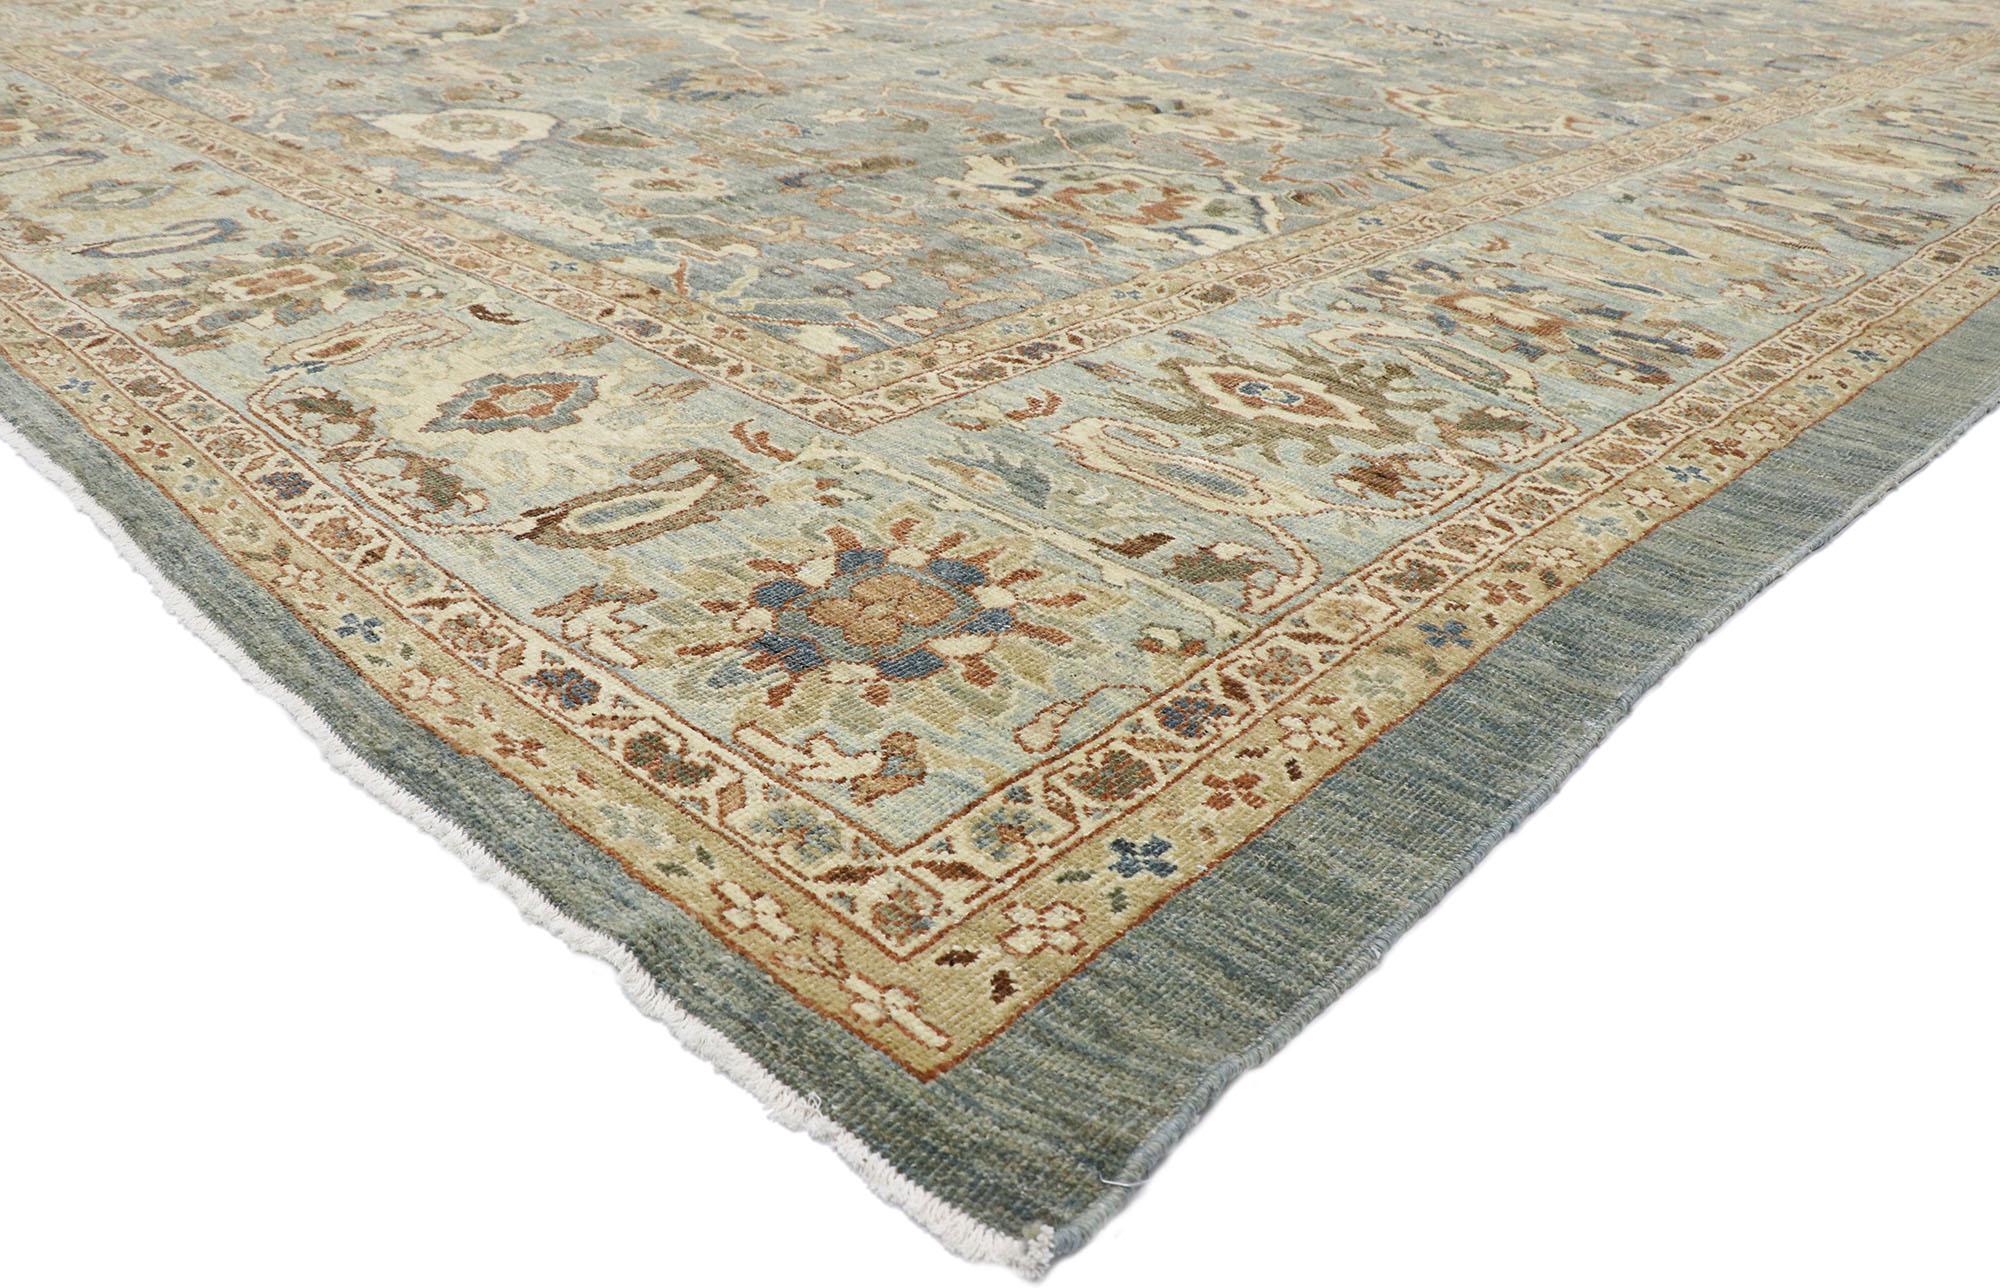 60902 new contemporary Persian Sultanabad rug with Modern style 13'10 x 17'09. This hand-knotted wool contemporary Persian Sultanabad rug features an all-over botanical trellis pattern spread across an abrashed cerulean and gray striated field. An